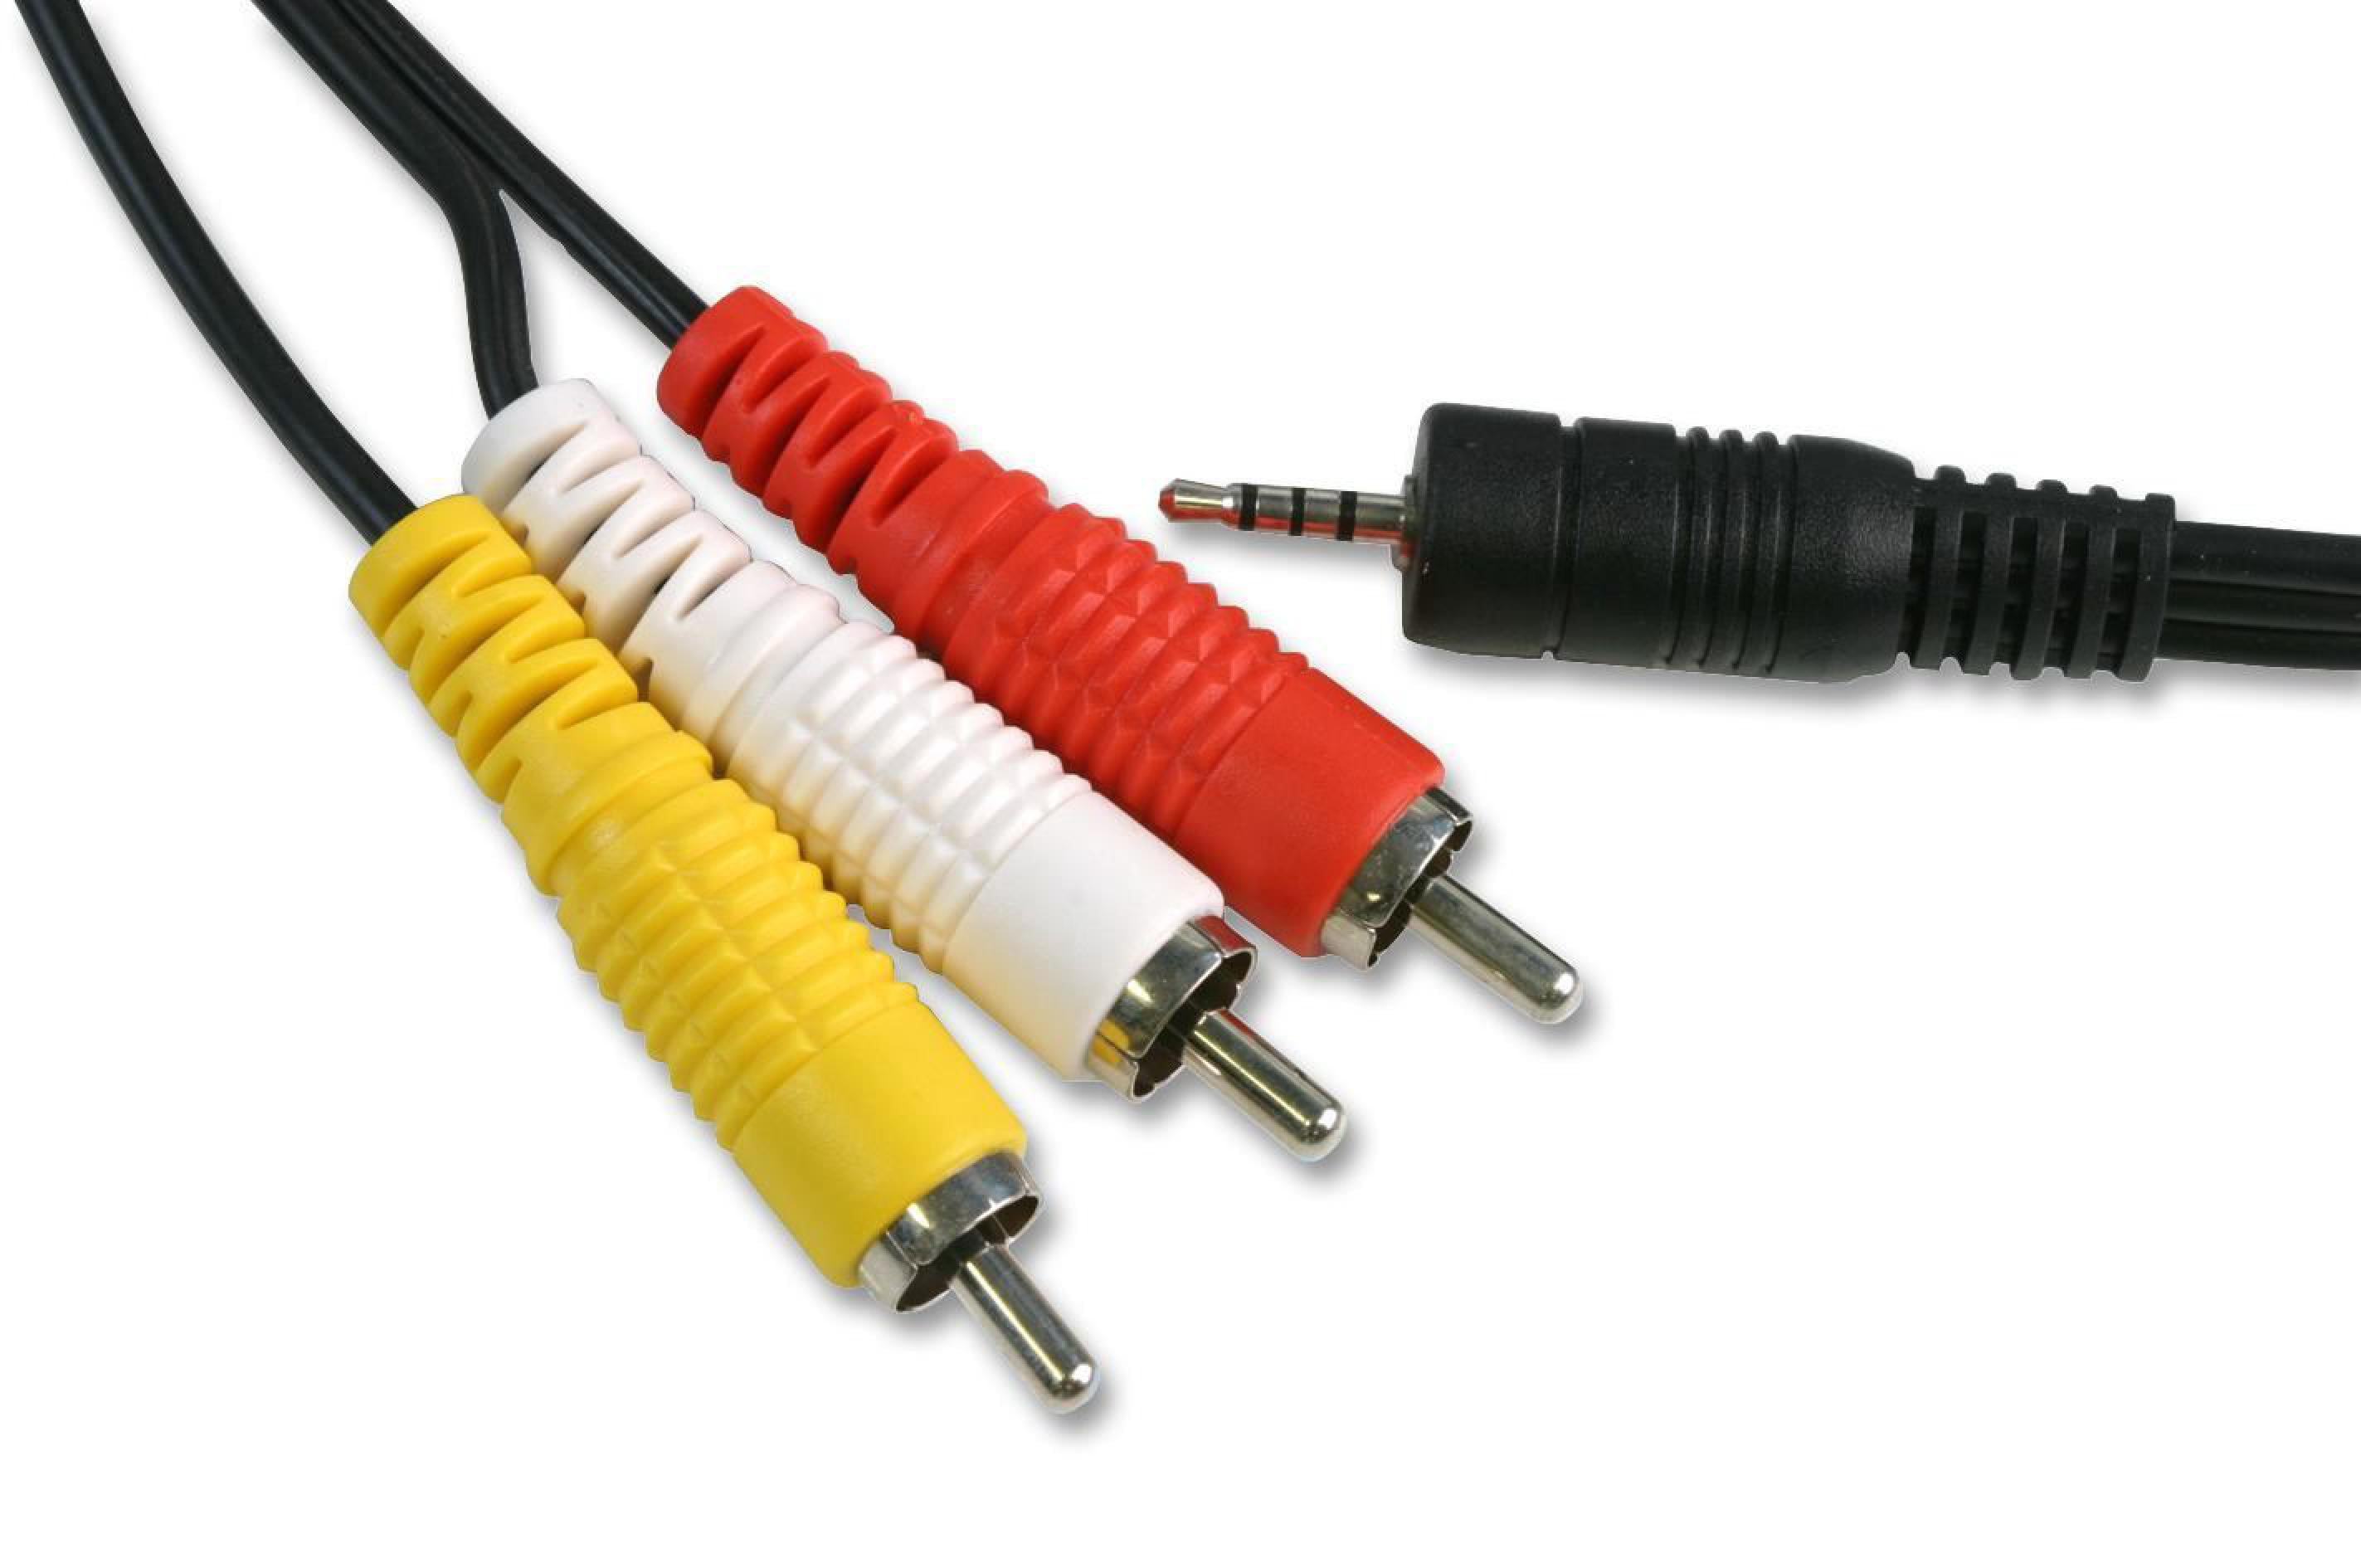 CABLE RCA MINI PLUG STEREO ROCK CABLE RCL20904D4 3MT - Accesorios